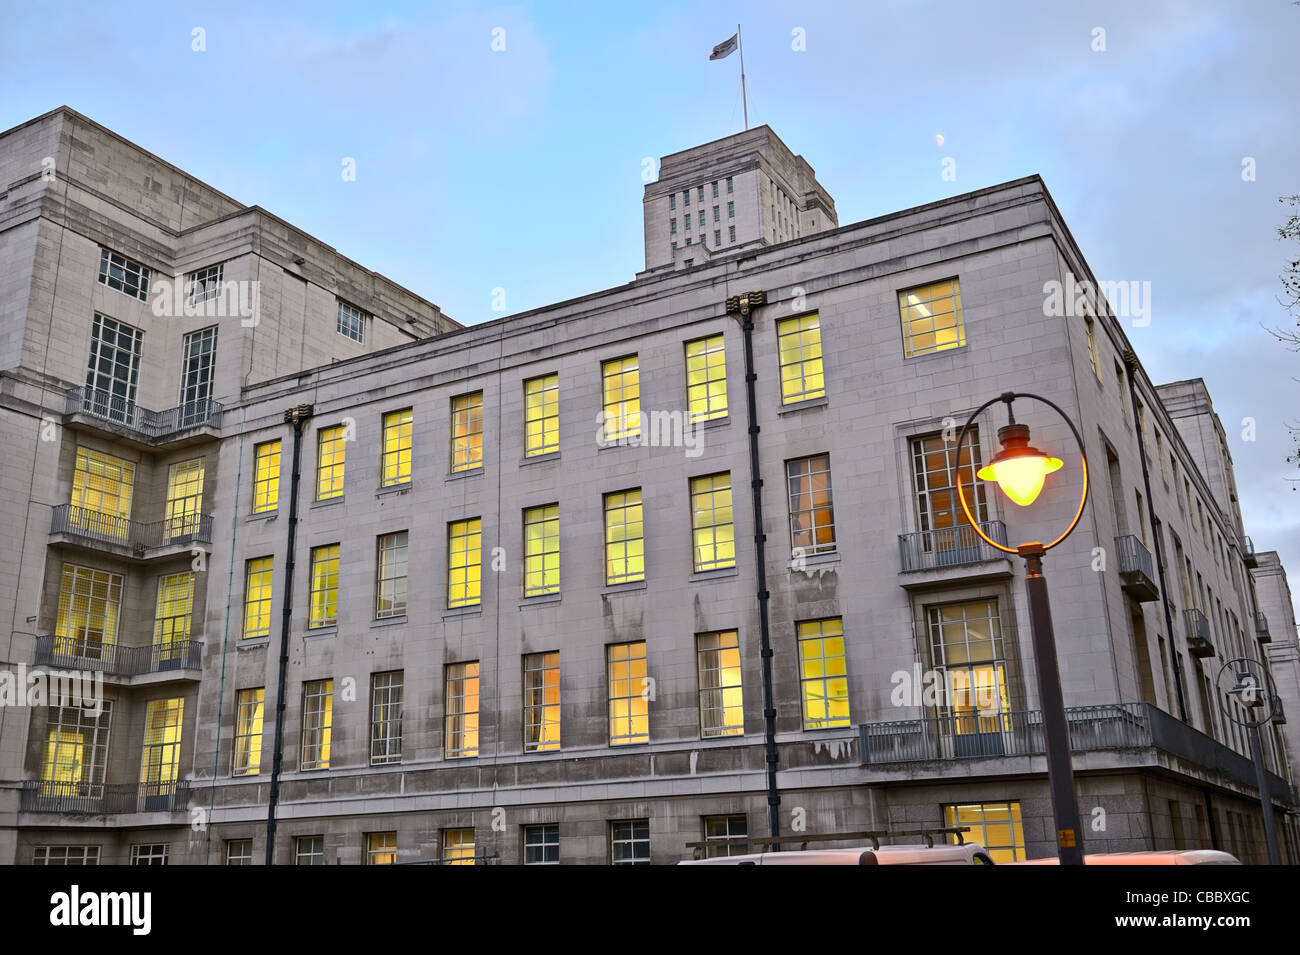 The Senate House of the University of London, Bloomsbury Campus Stock Photo